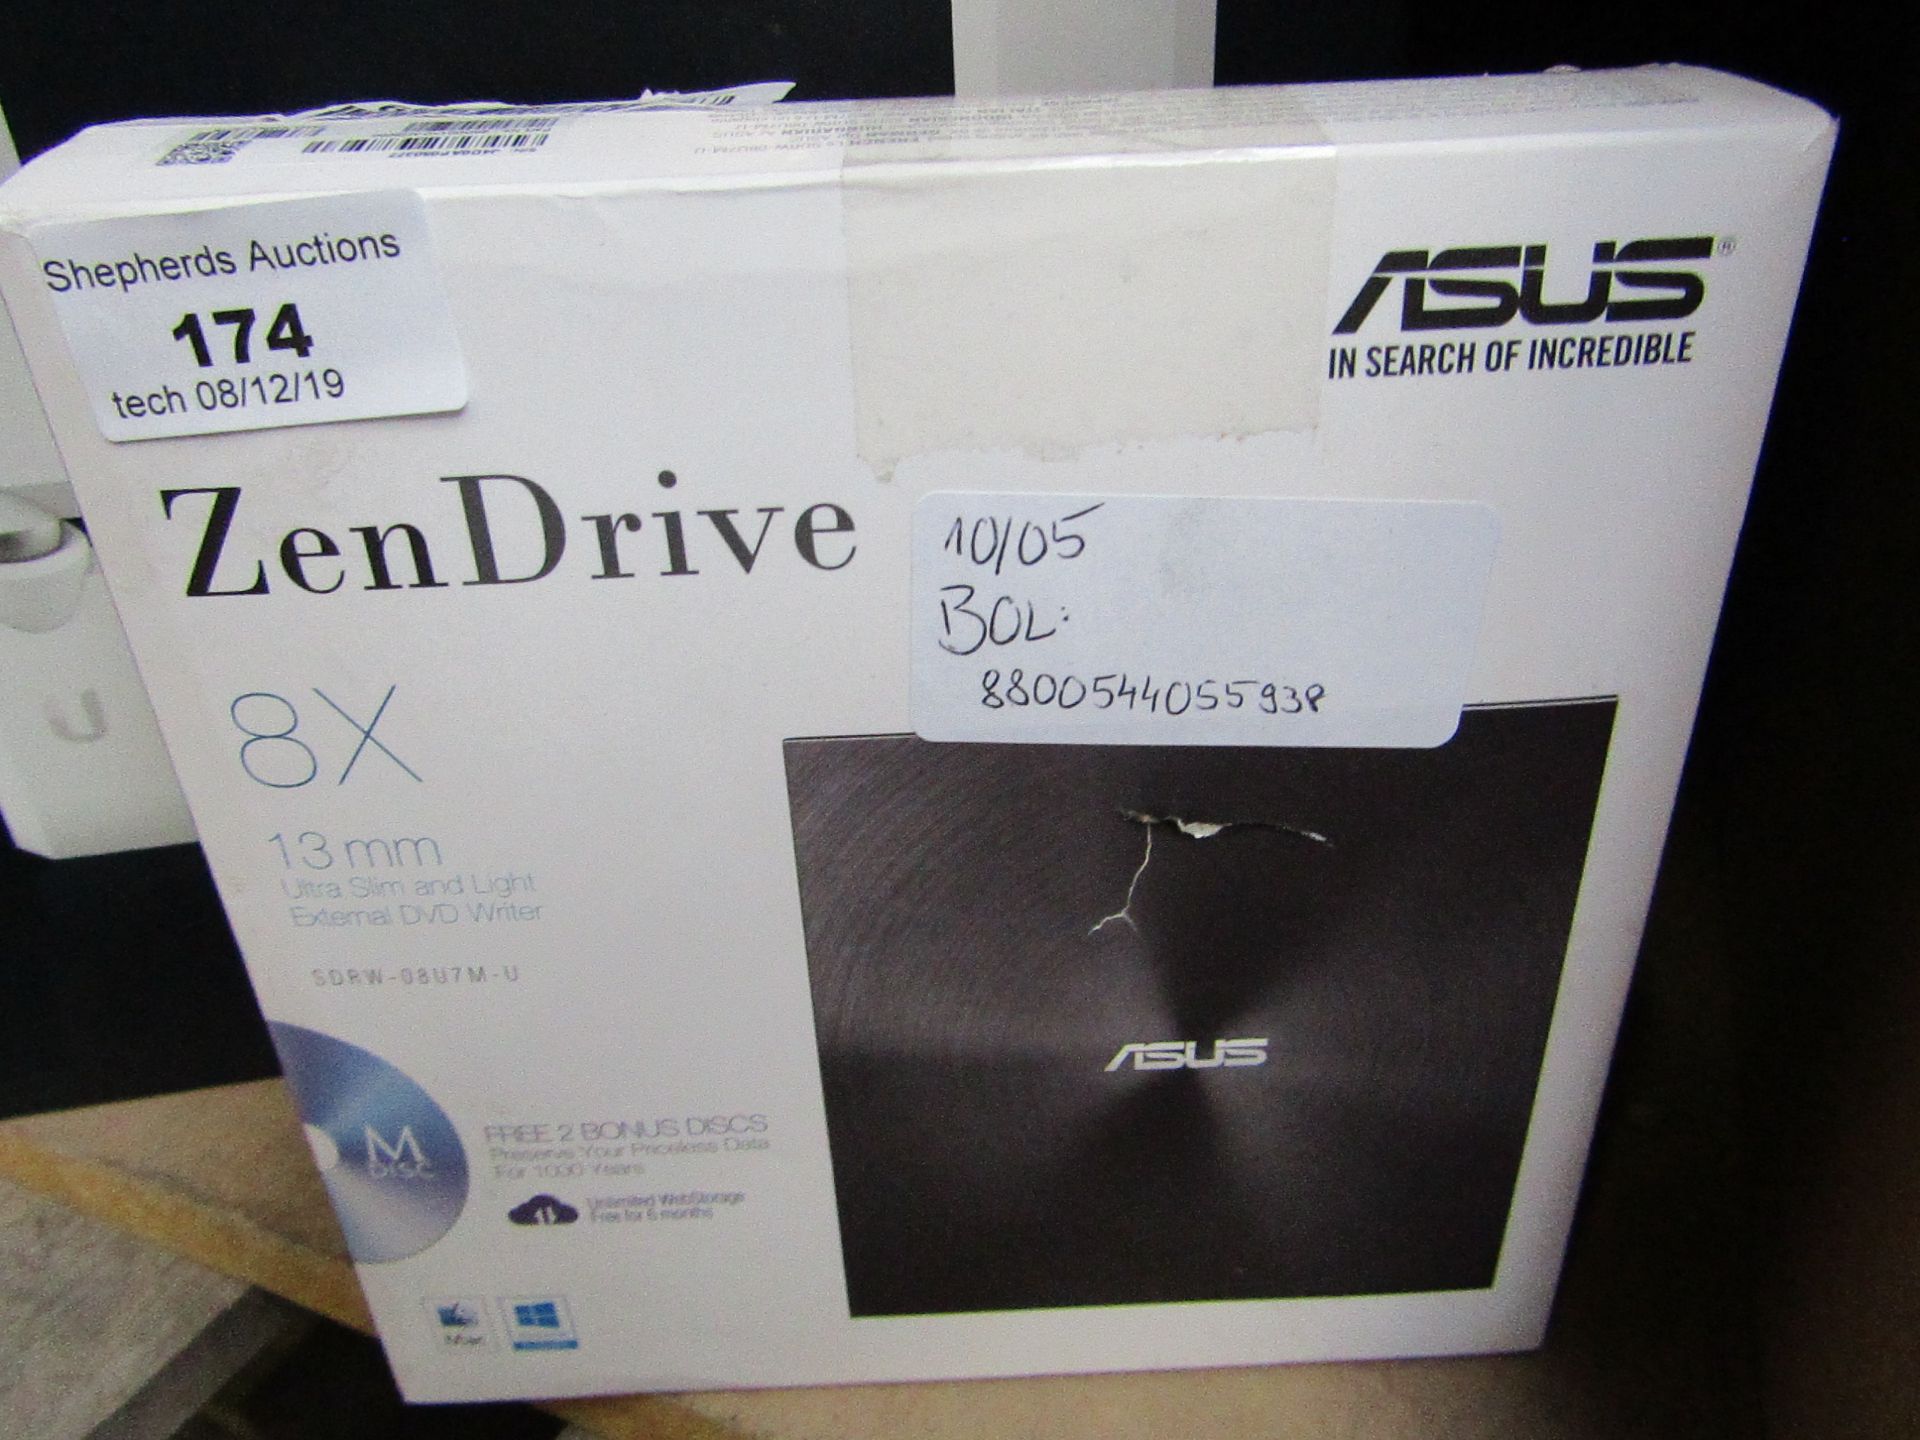 Asus Zen Drive 8X 13mm, untested and boxed.